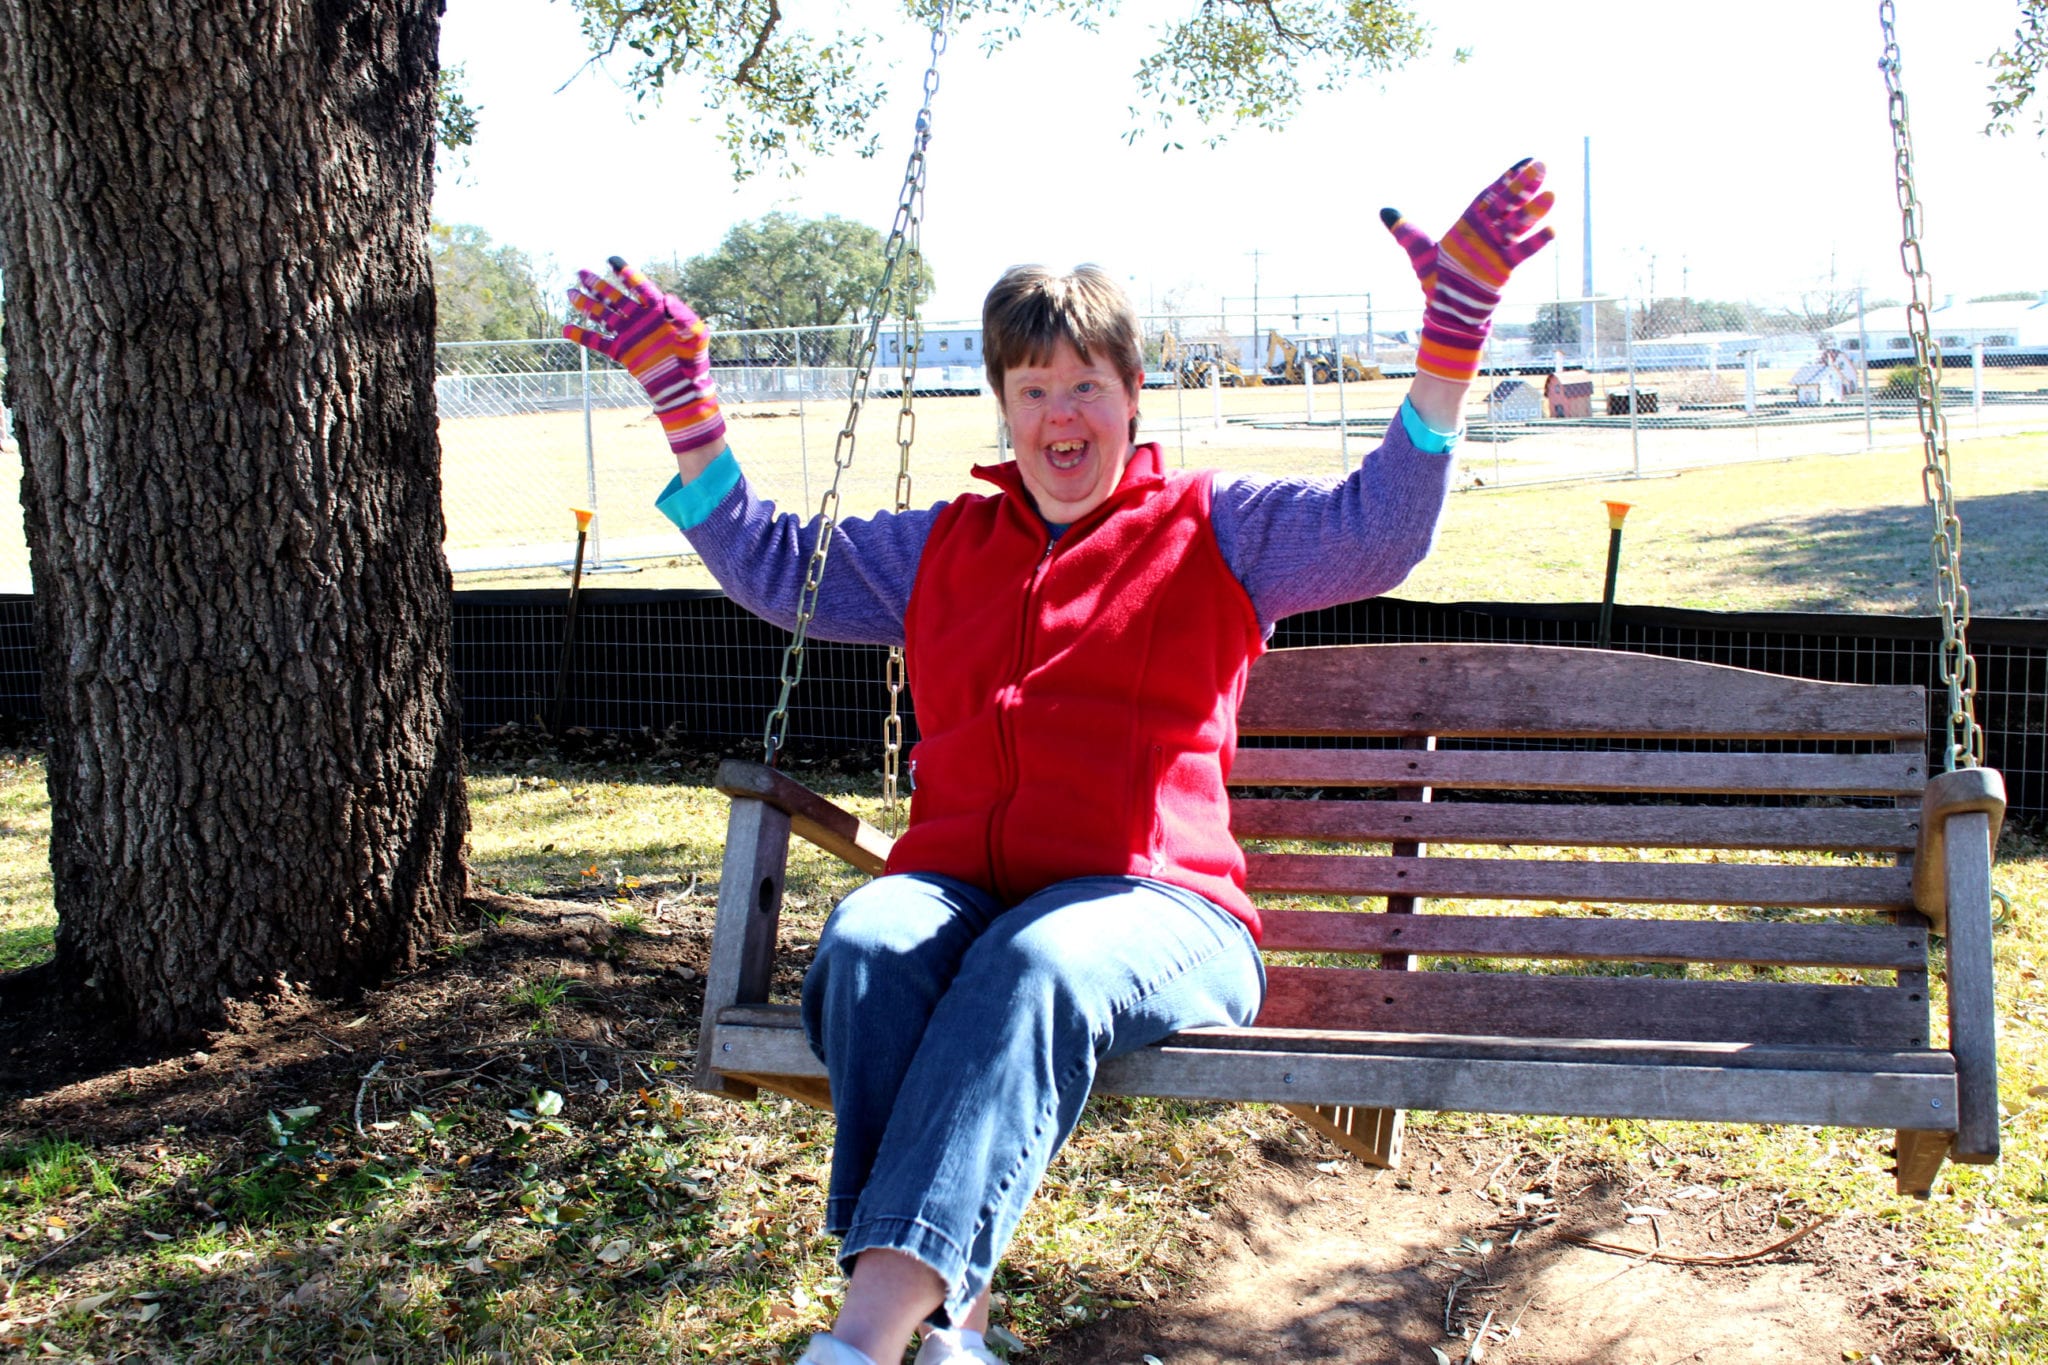 A smiling woman sitting on a swing.